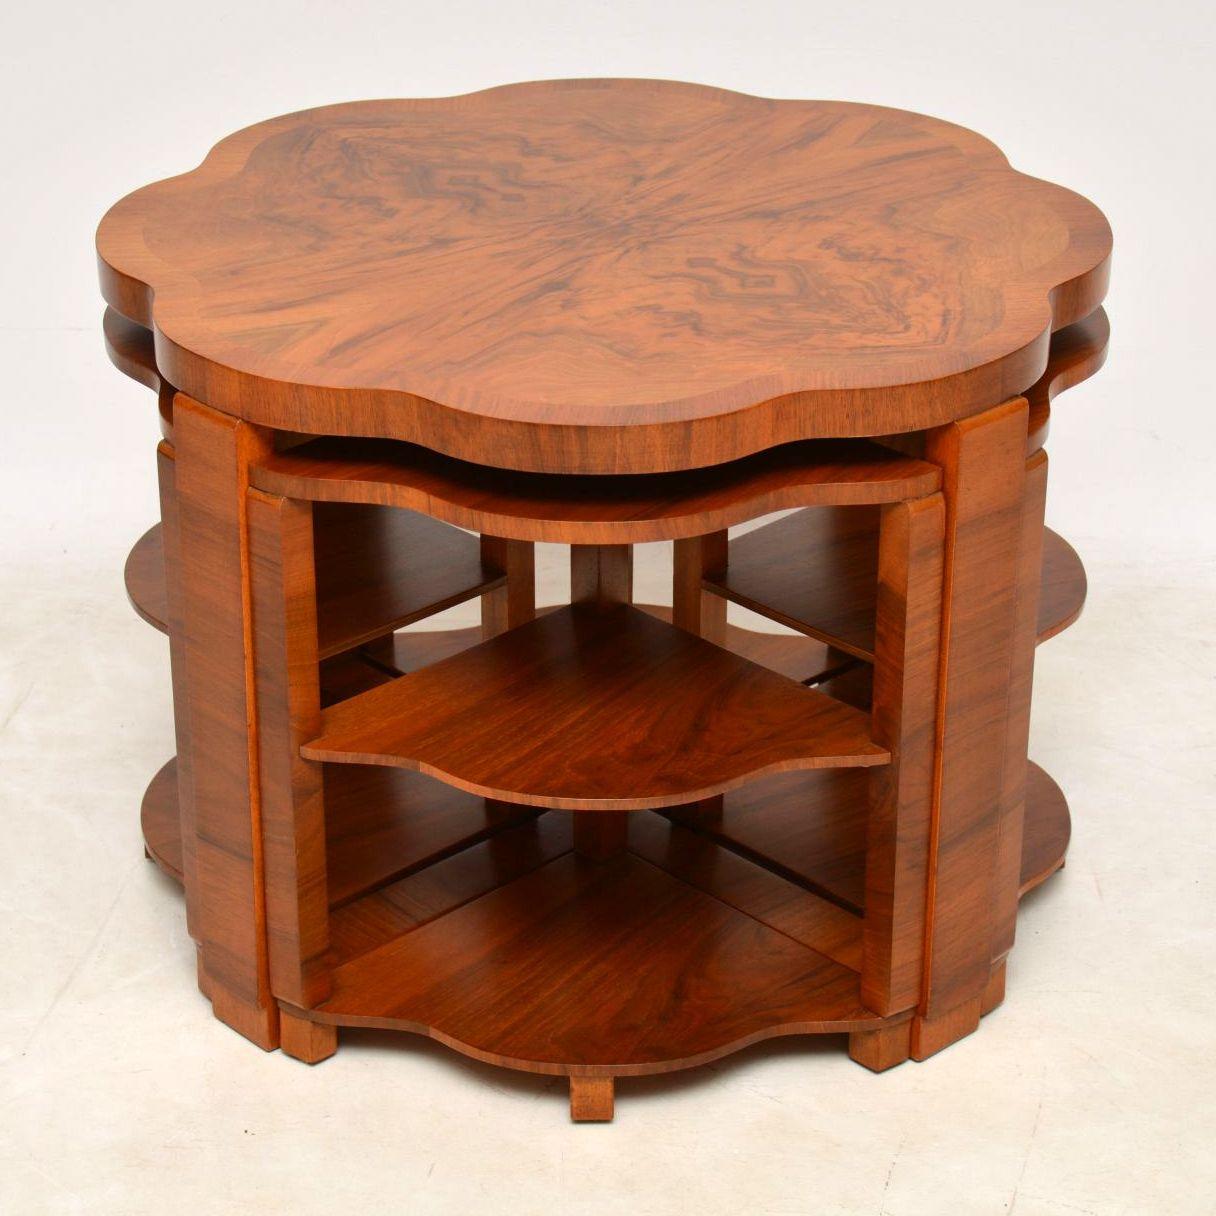 A stunning and very well made original Art Deco period nesting coffee table, beautifully made from walnut. This has a lovely flower shaped top, the quality is excellent and this is a very useful piece of furniture. We have had this fully stripped